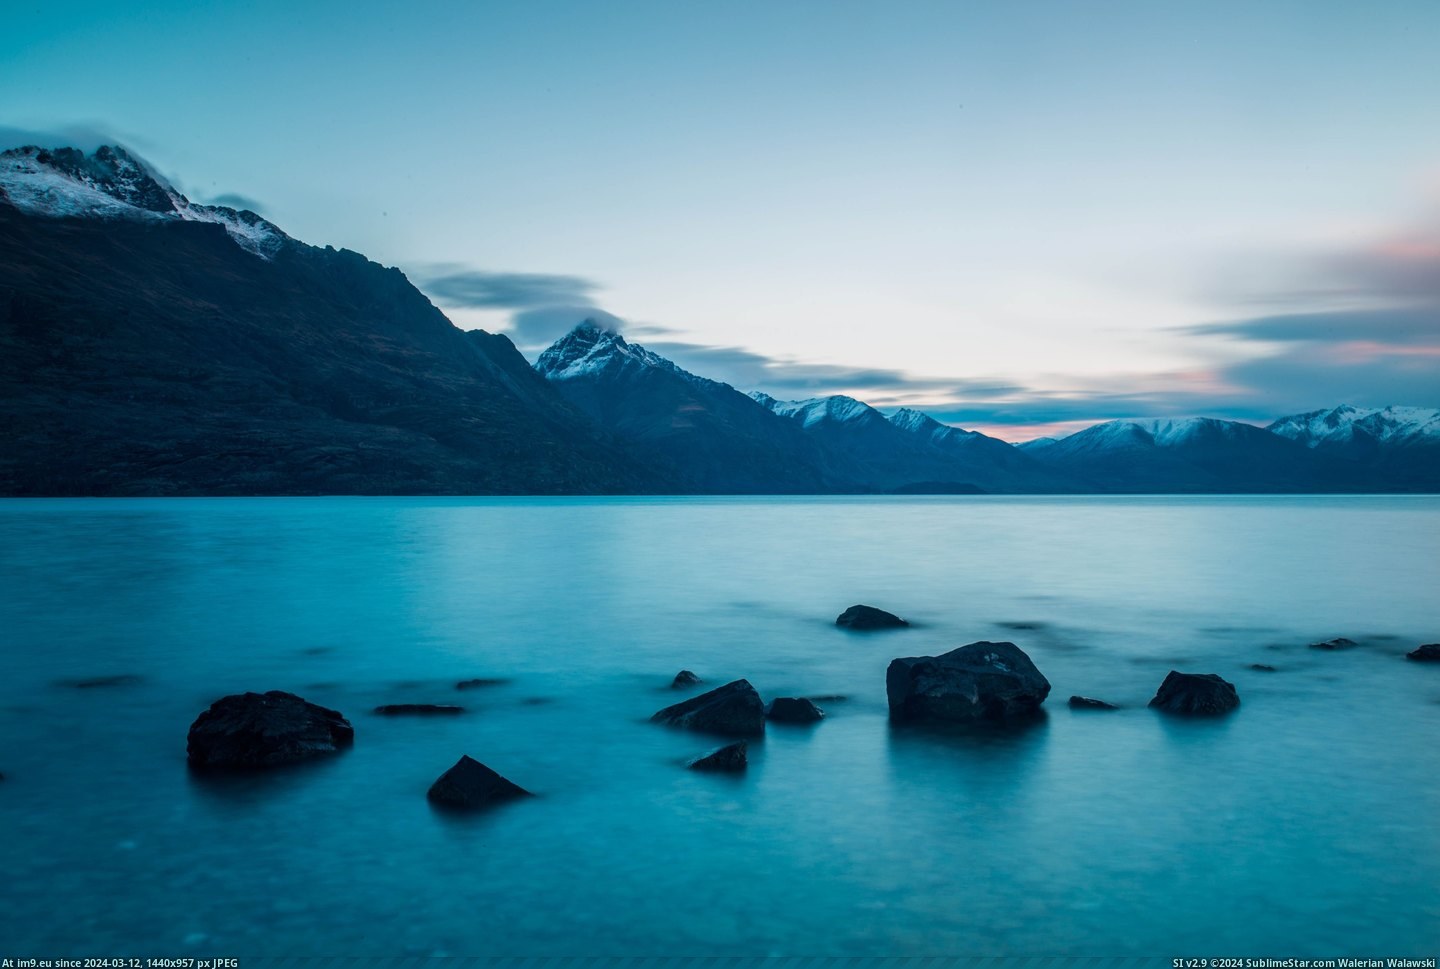 #Day #Hotel #Weeks #Minutes #Place #Zealand [Earthporn] I went to New Zealand for 2 weeks and found this place 5 minutes from my hotel on my last day there [5440x3627][OC] Pic. (Изображение из альбом My r/EARTHPORN favs))